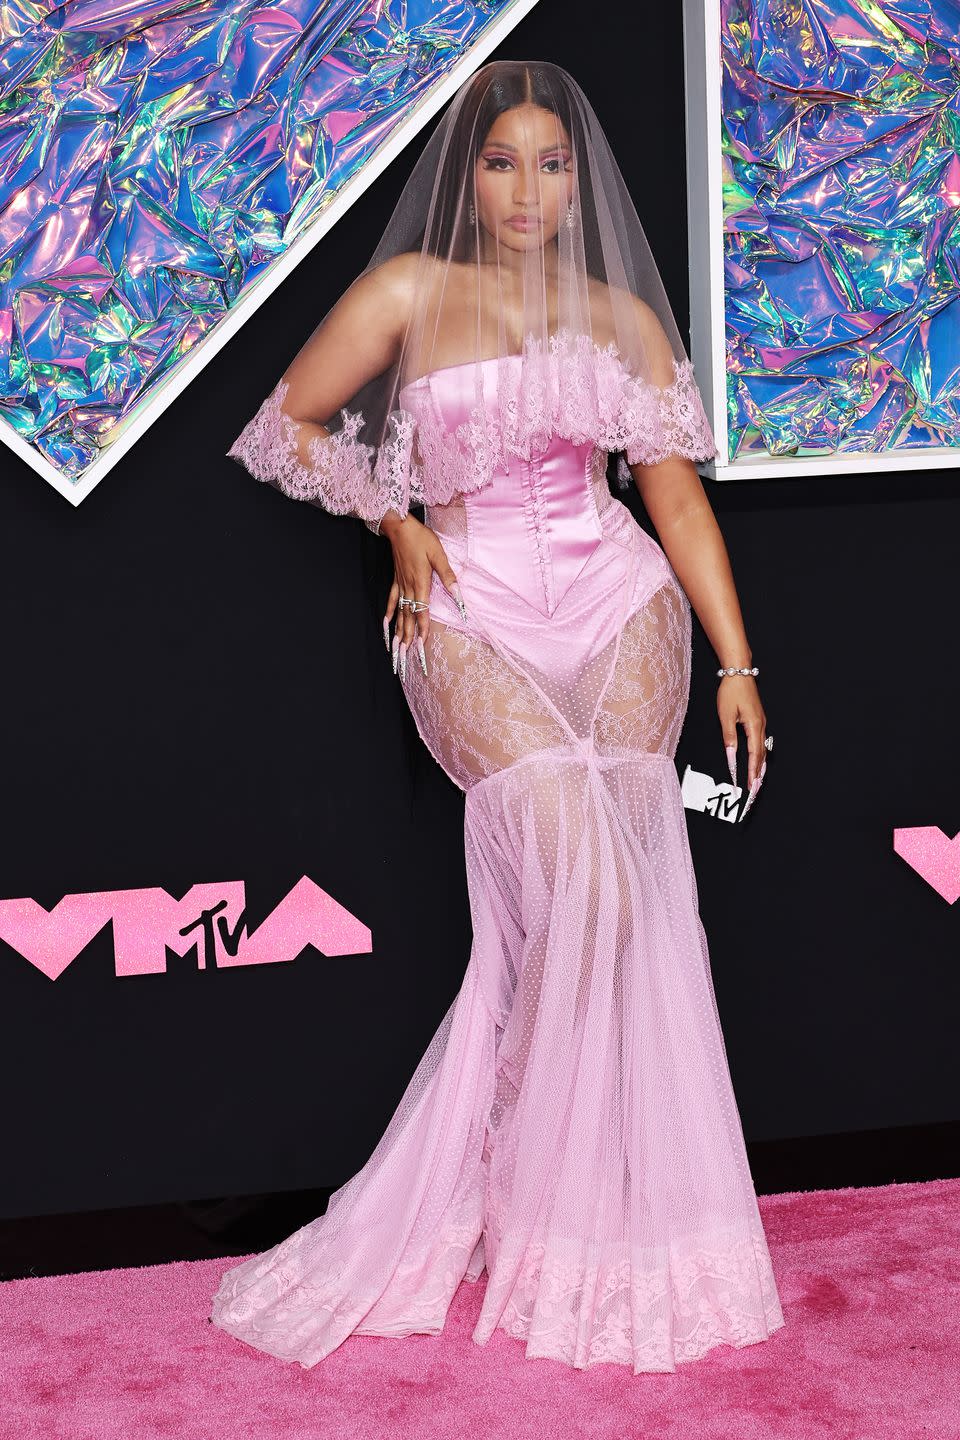 newark, new jersey september 12 nicki minaj attends the 2023 mtv video music awards at the prudential center on september 12, 2023 in newark, new jersey photo by jamie mccarthywireimage